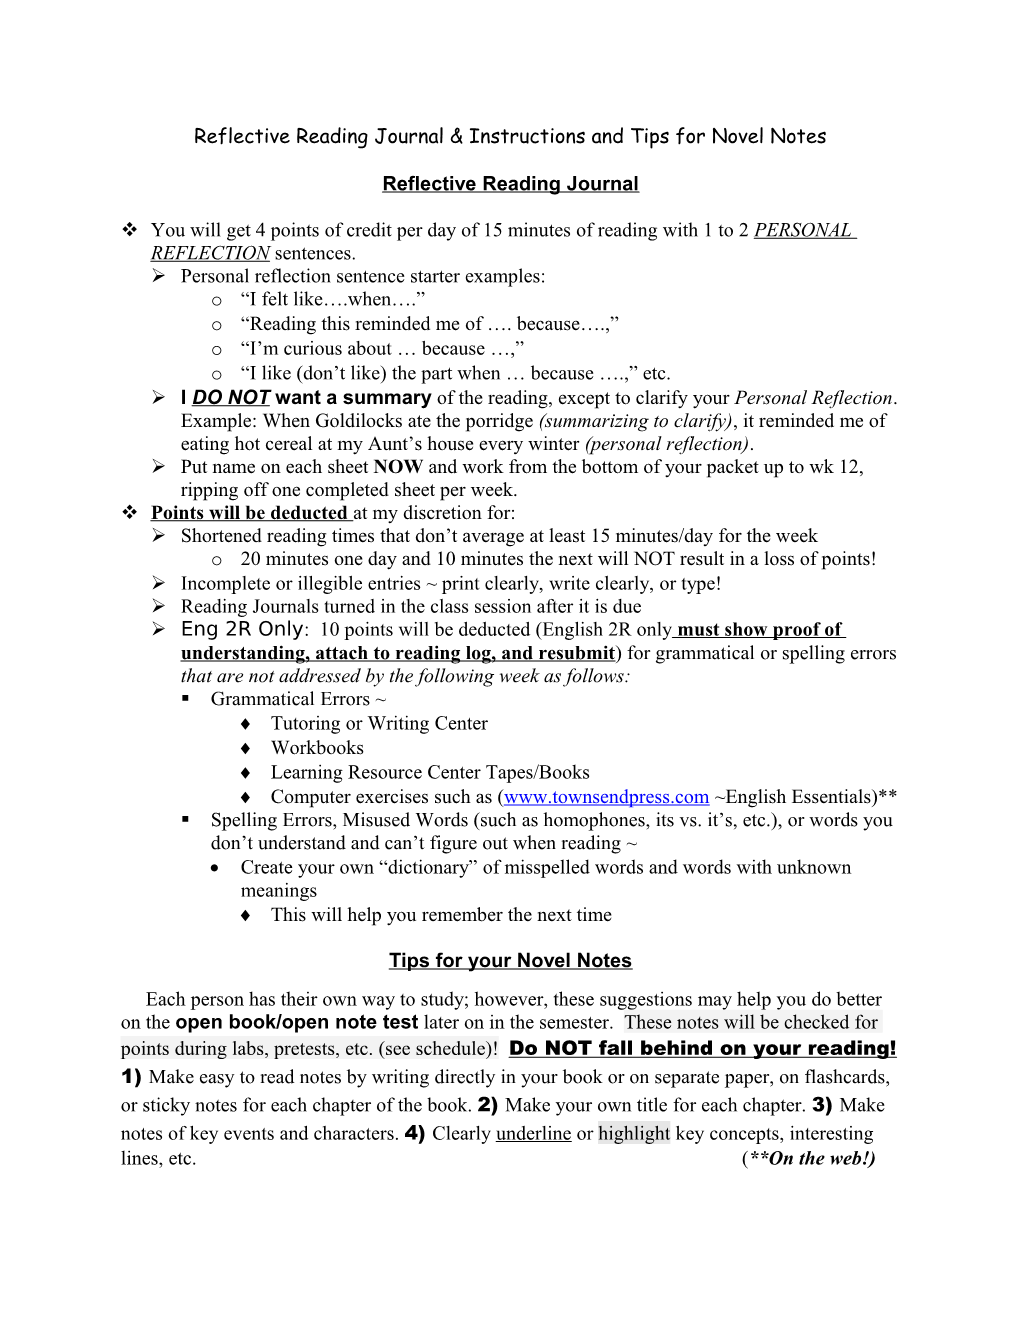 Reflective Reading Journal & Instructions and Tips for Novel Notes